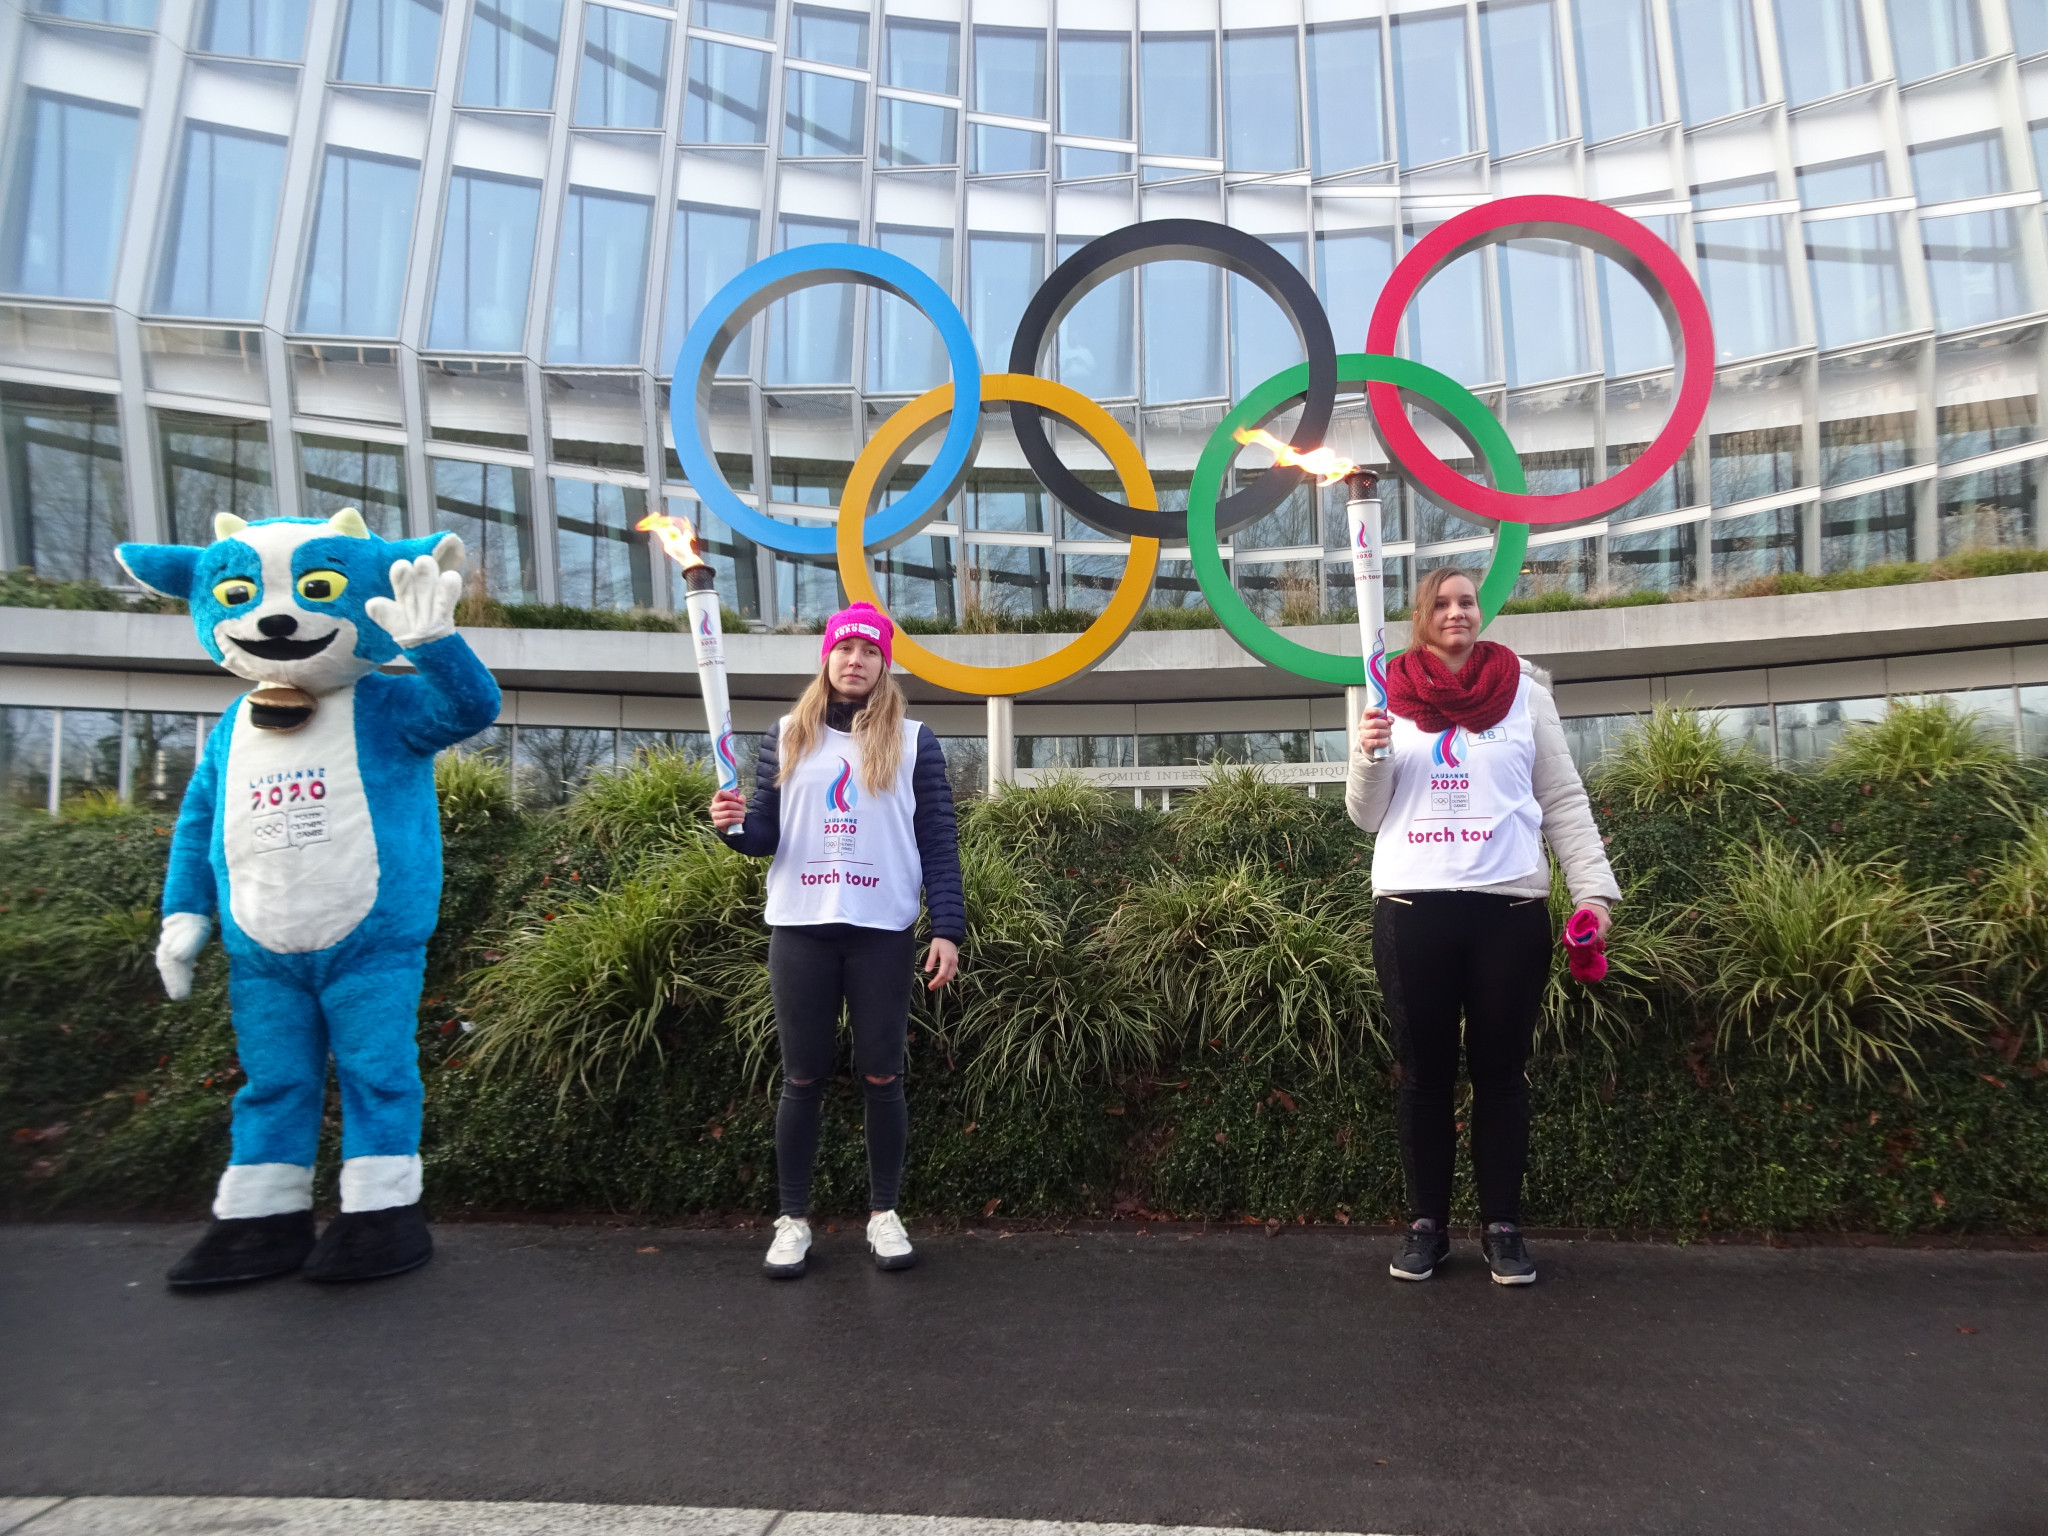 Lausanne 2020 mascot Yodli was on hand to assist with the Torch Relay ©ITG